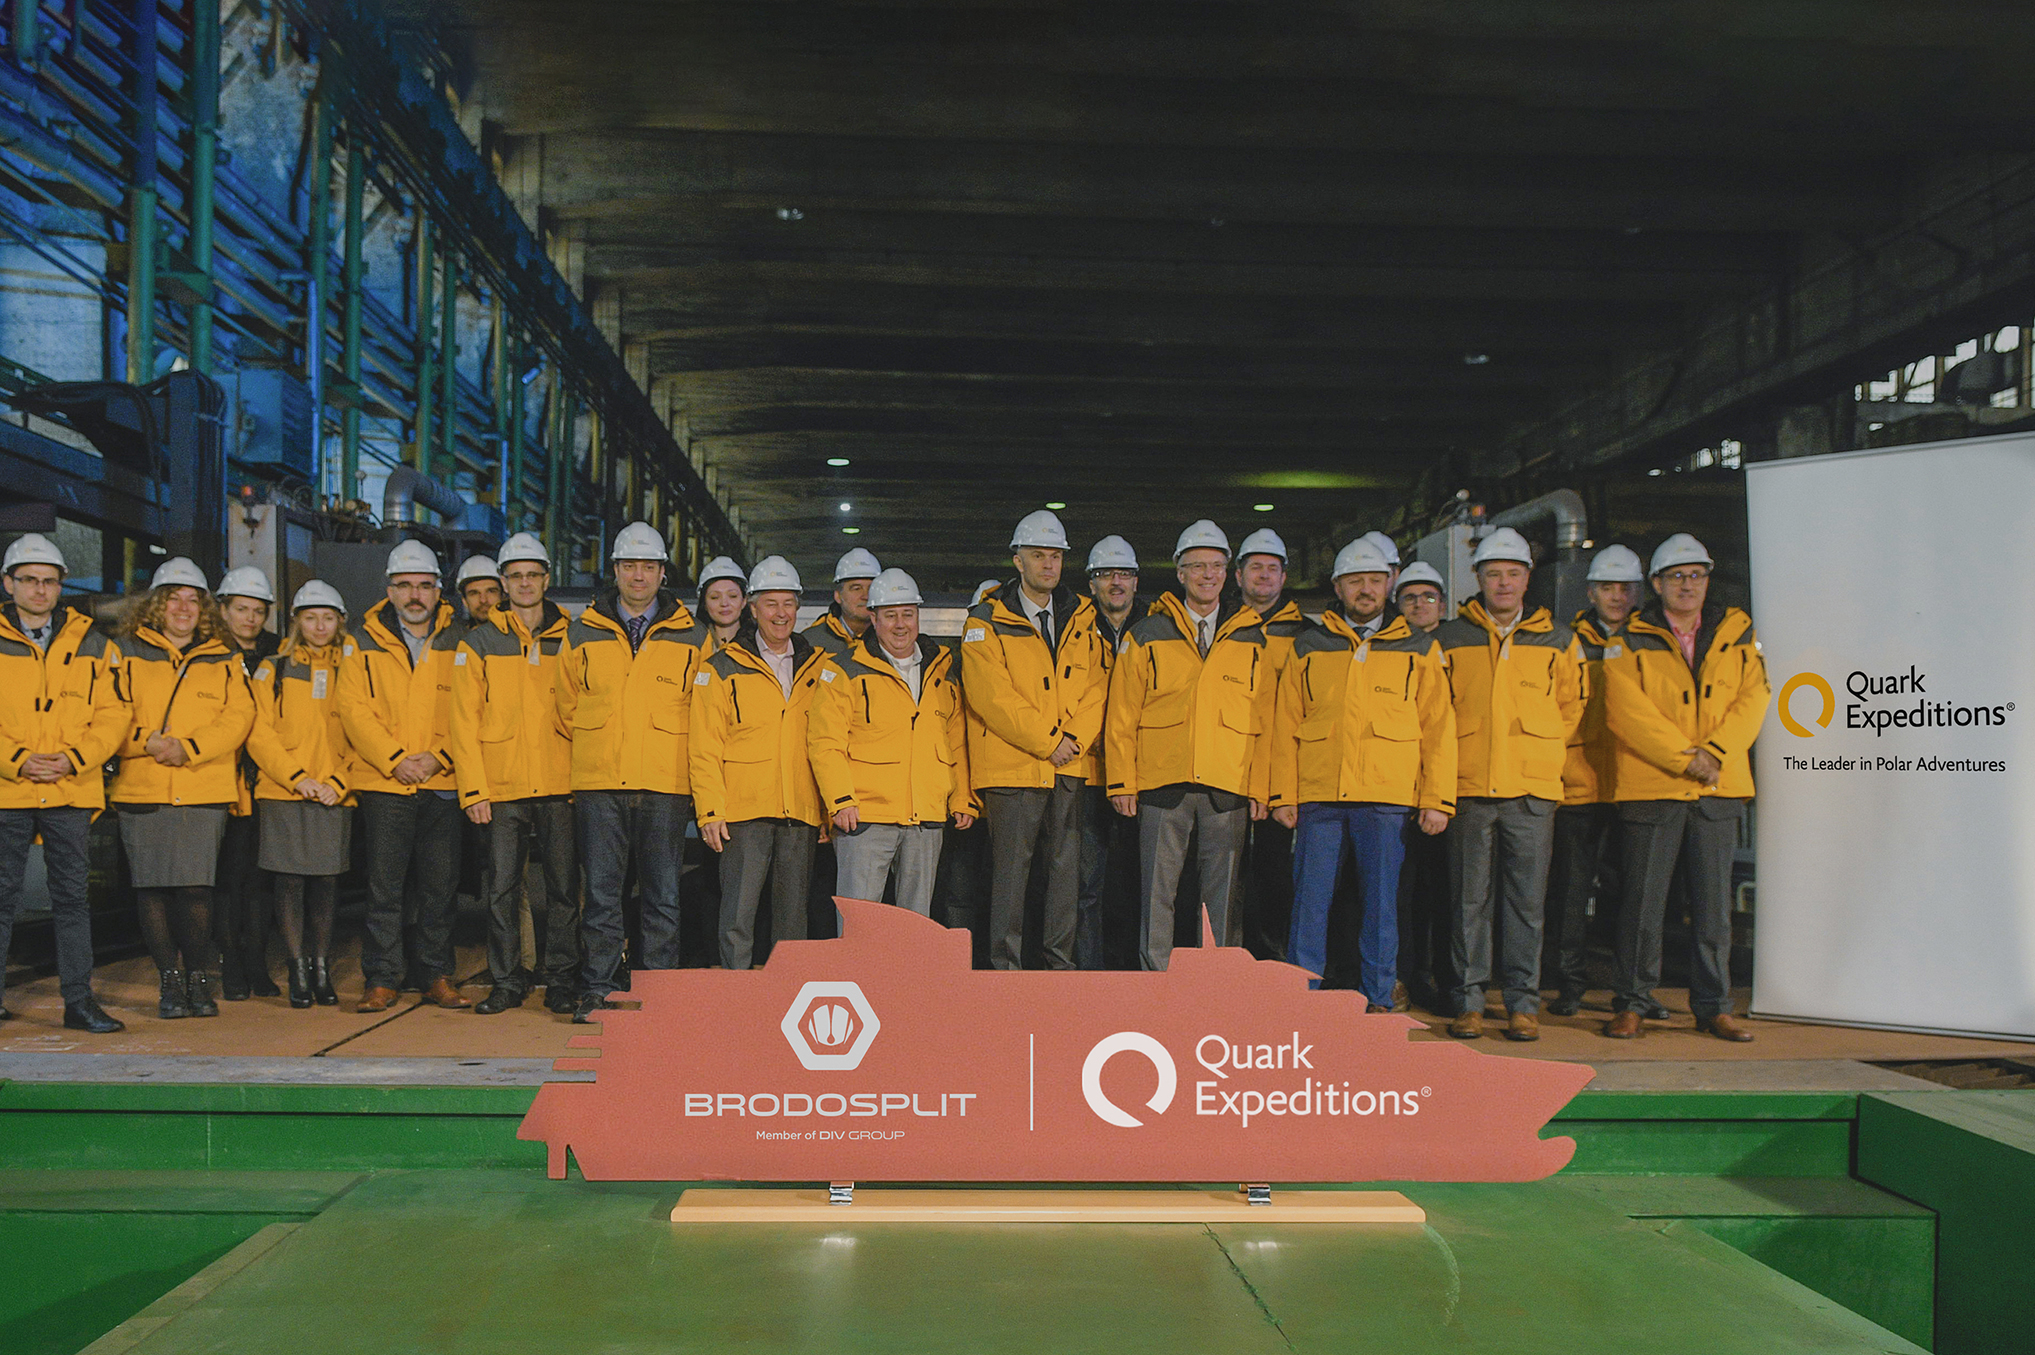 Andrew White, along with the ship building team and executives from Brodosplit, at the steel-cutting ceremony